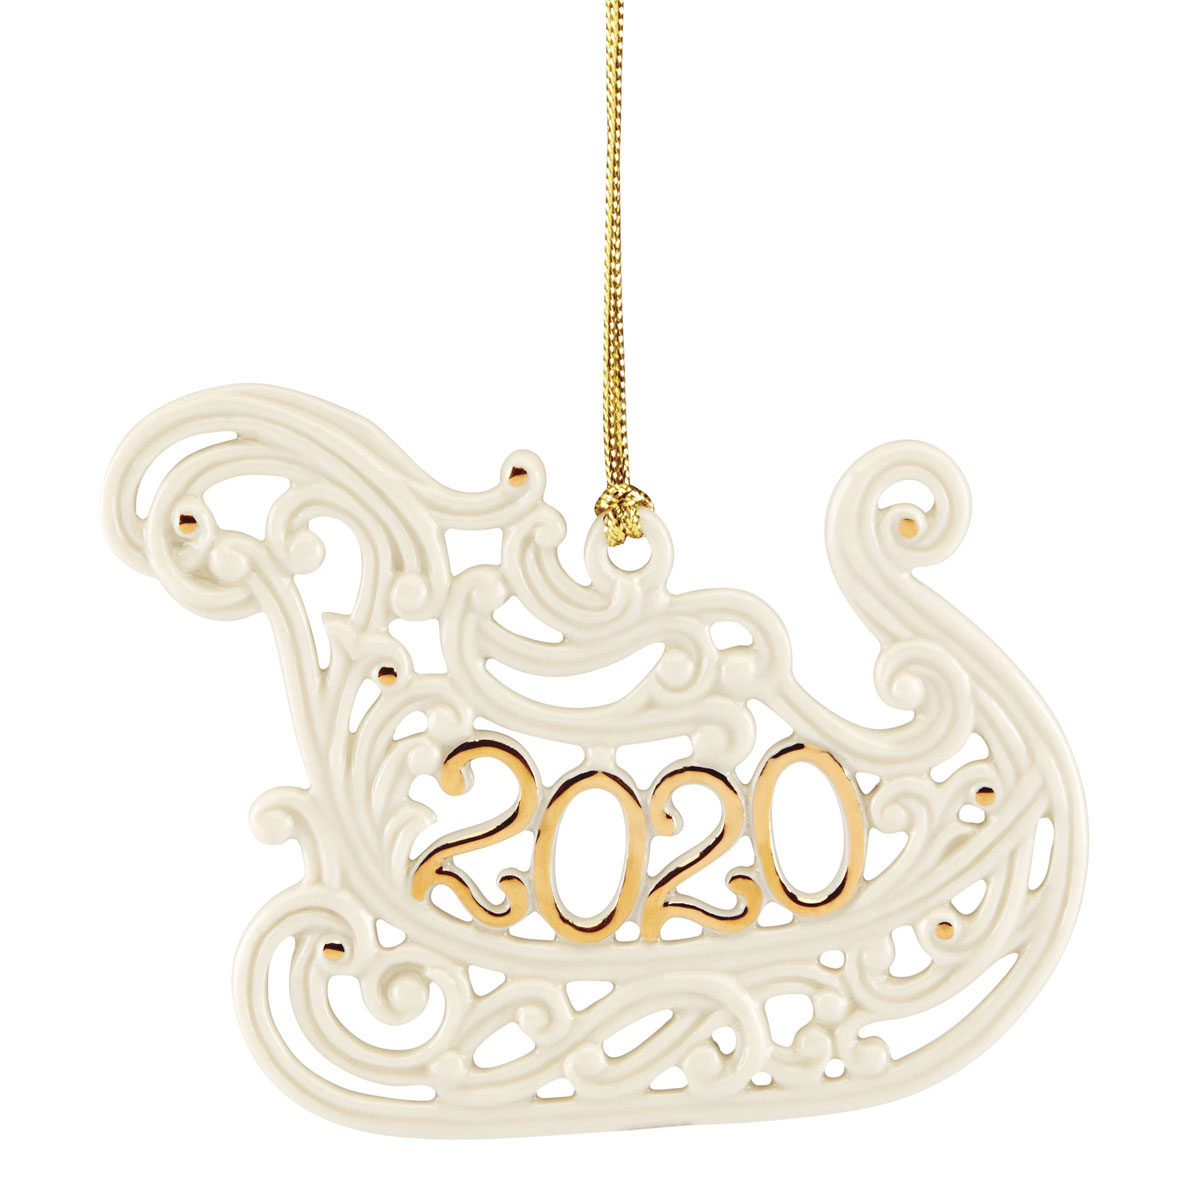 Lenox 2020 A Year To Remember Sleigh Ornament